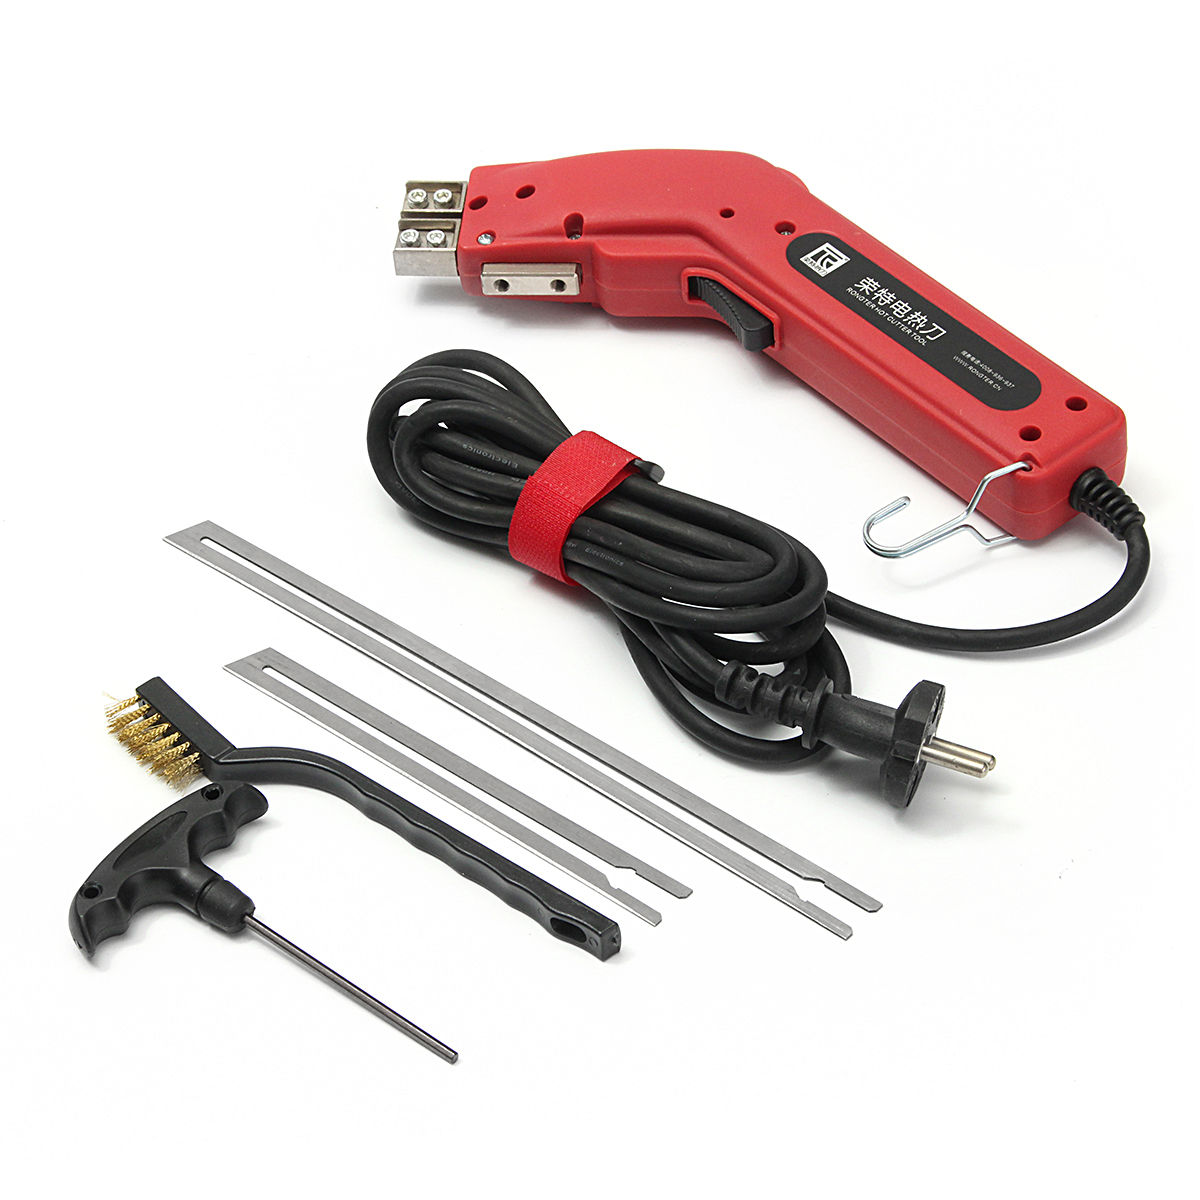 250W-220V-Nordstrand-Pro-Electric-Hot-Knife-Styrofoam-Foam-Cutter-Tool-with-Blades-Accessories-1297210-6